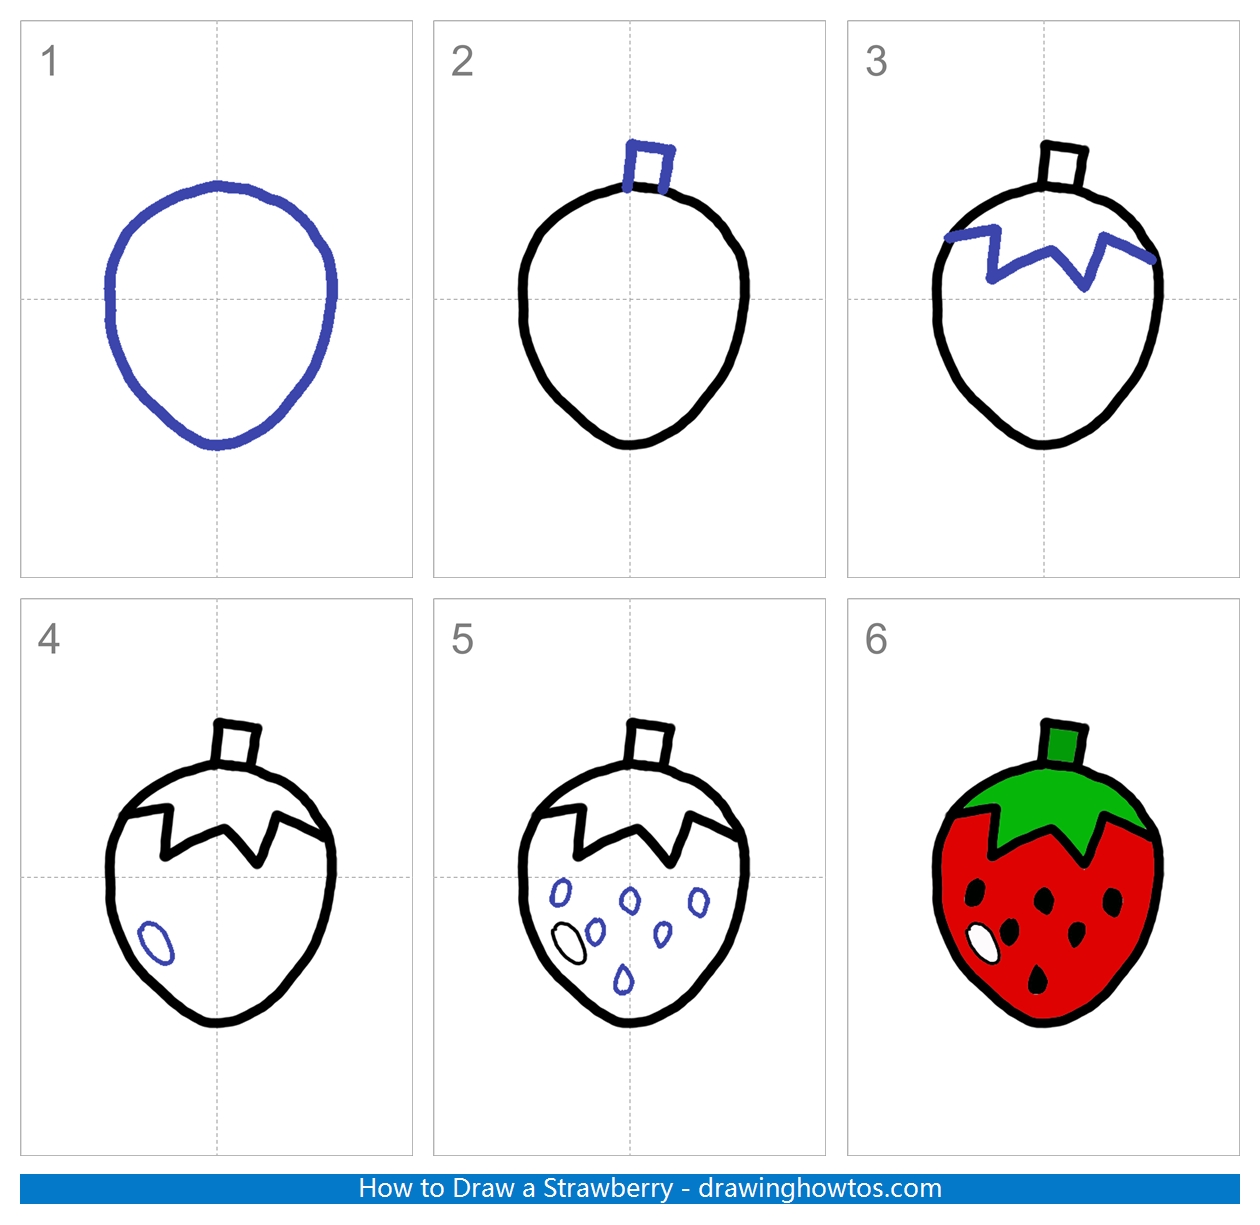 How to Draw a Strawberry Step by Step